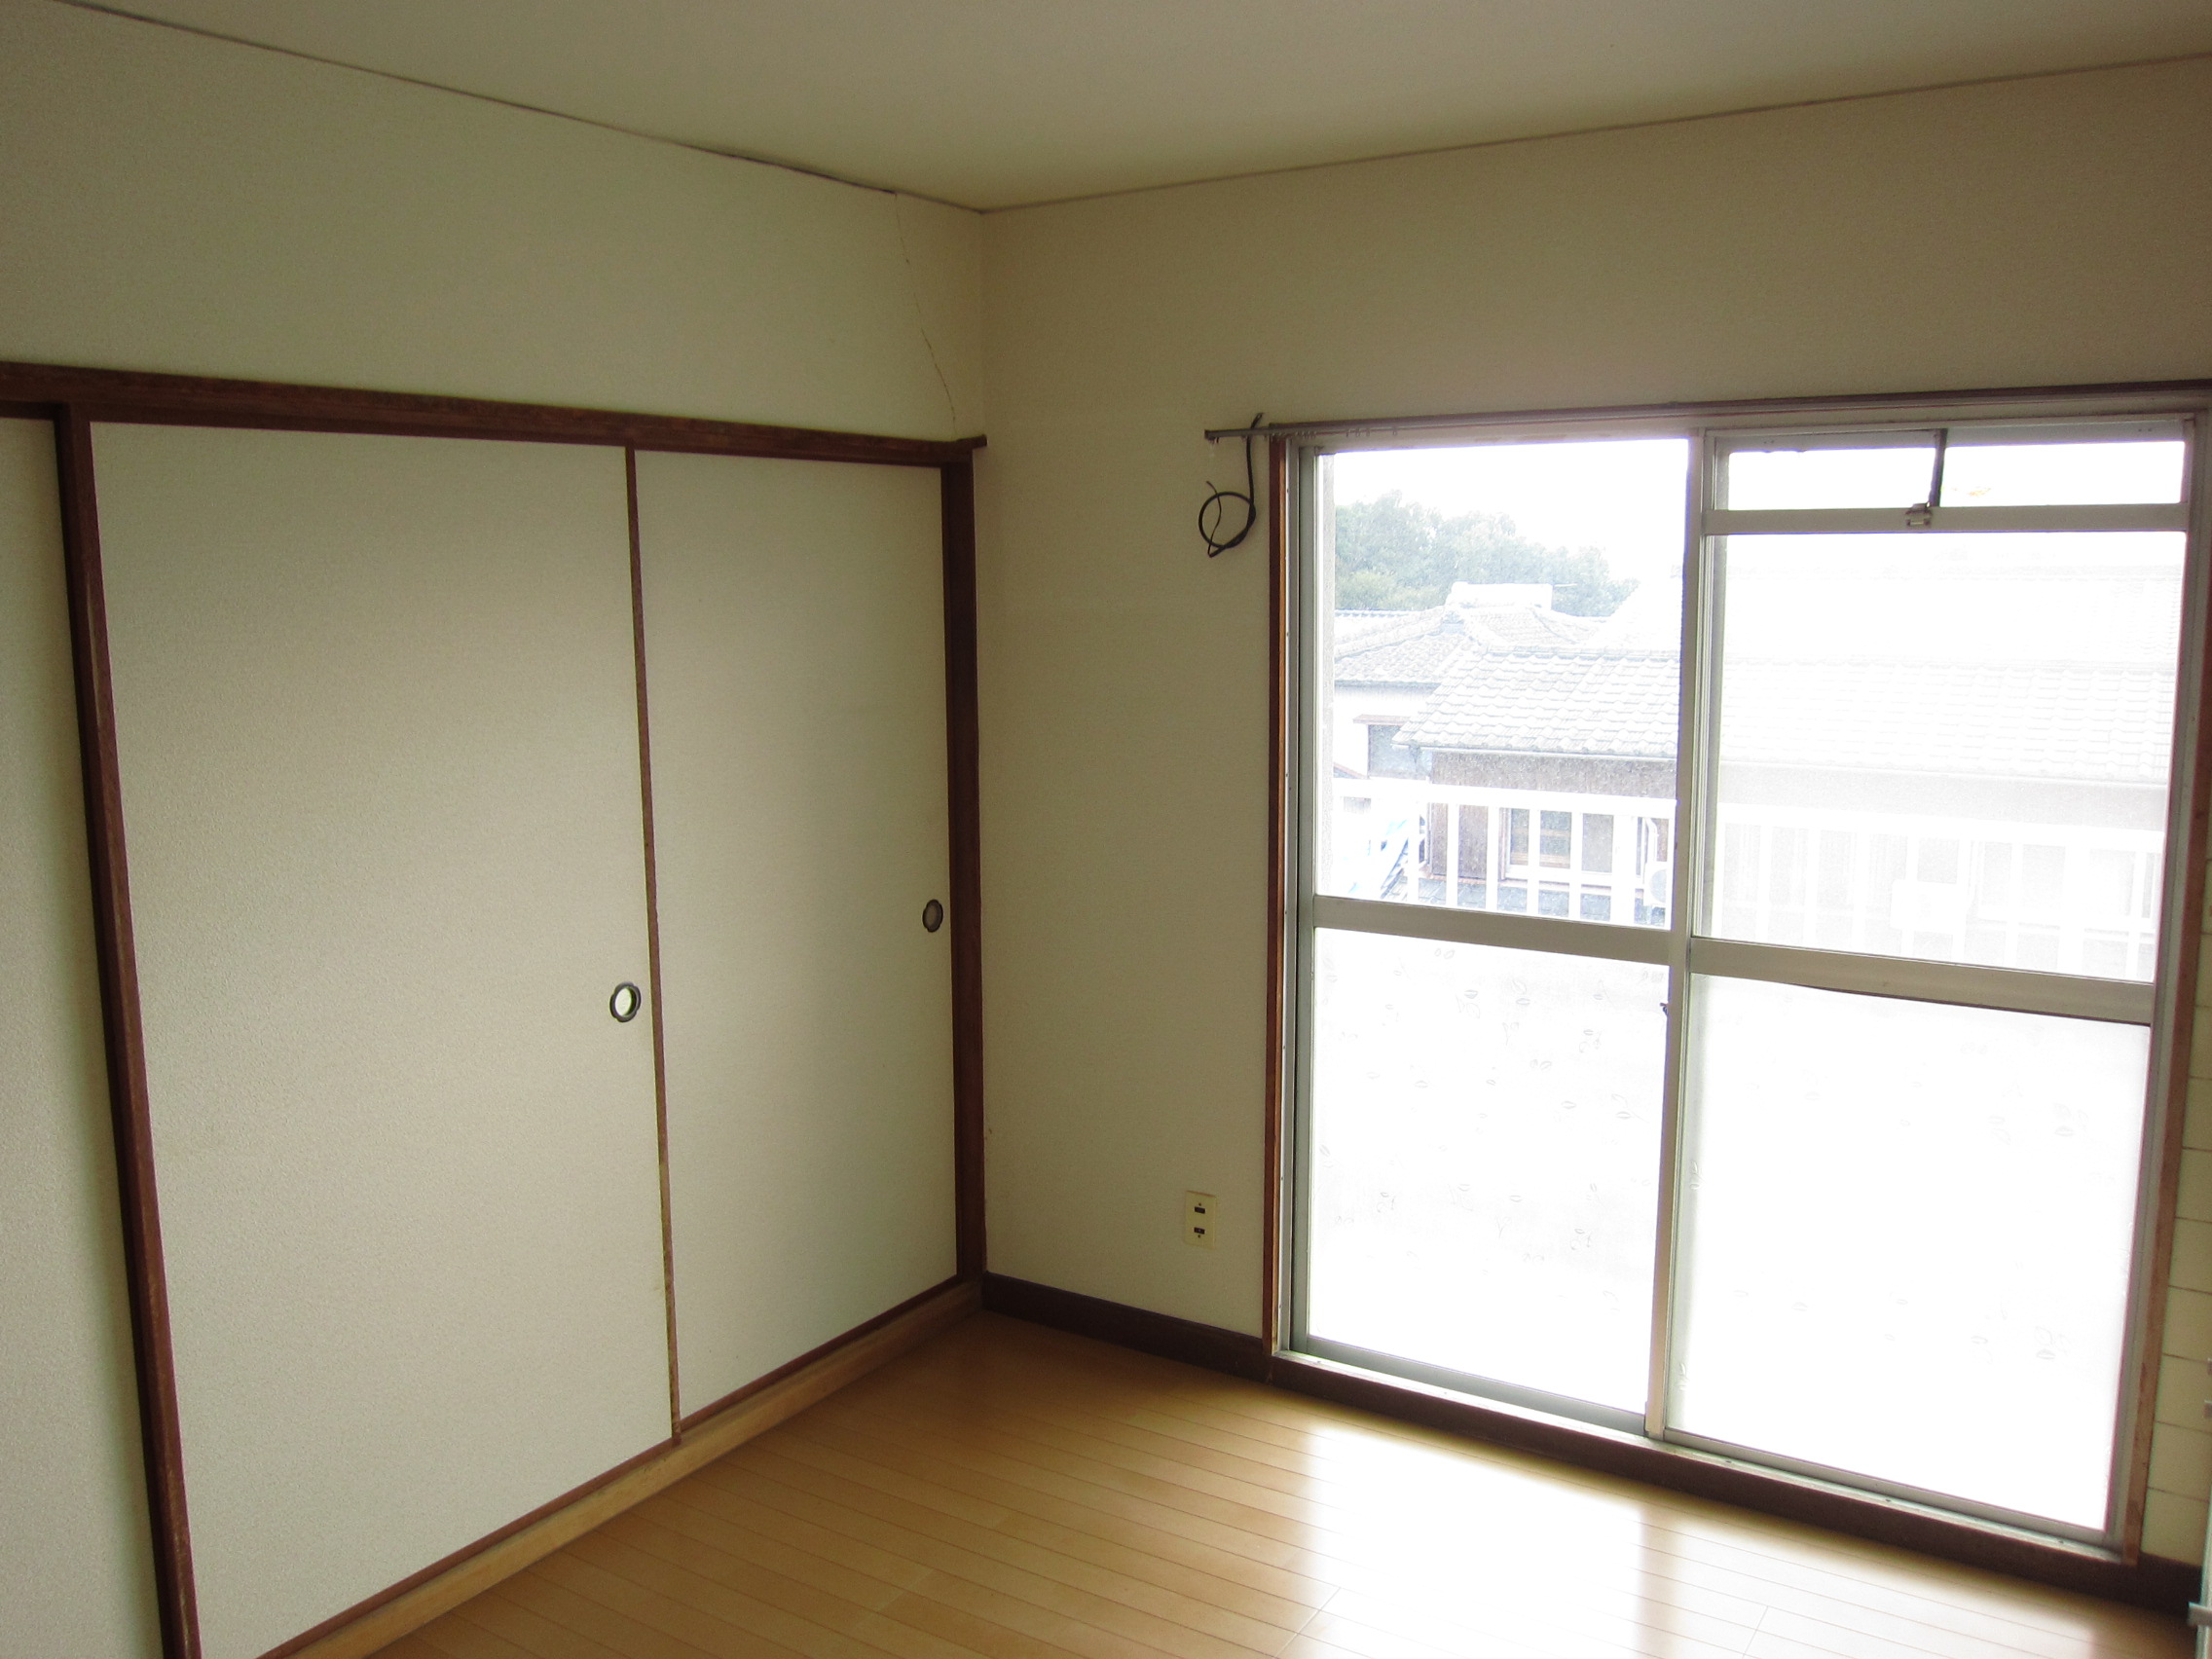 Living and room. We put in a balcony or Japanese-style room from DK!